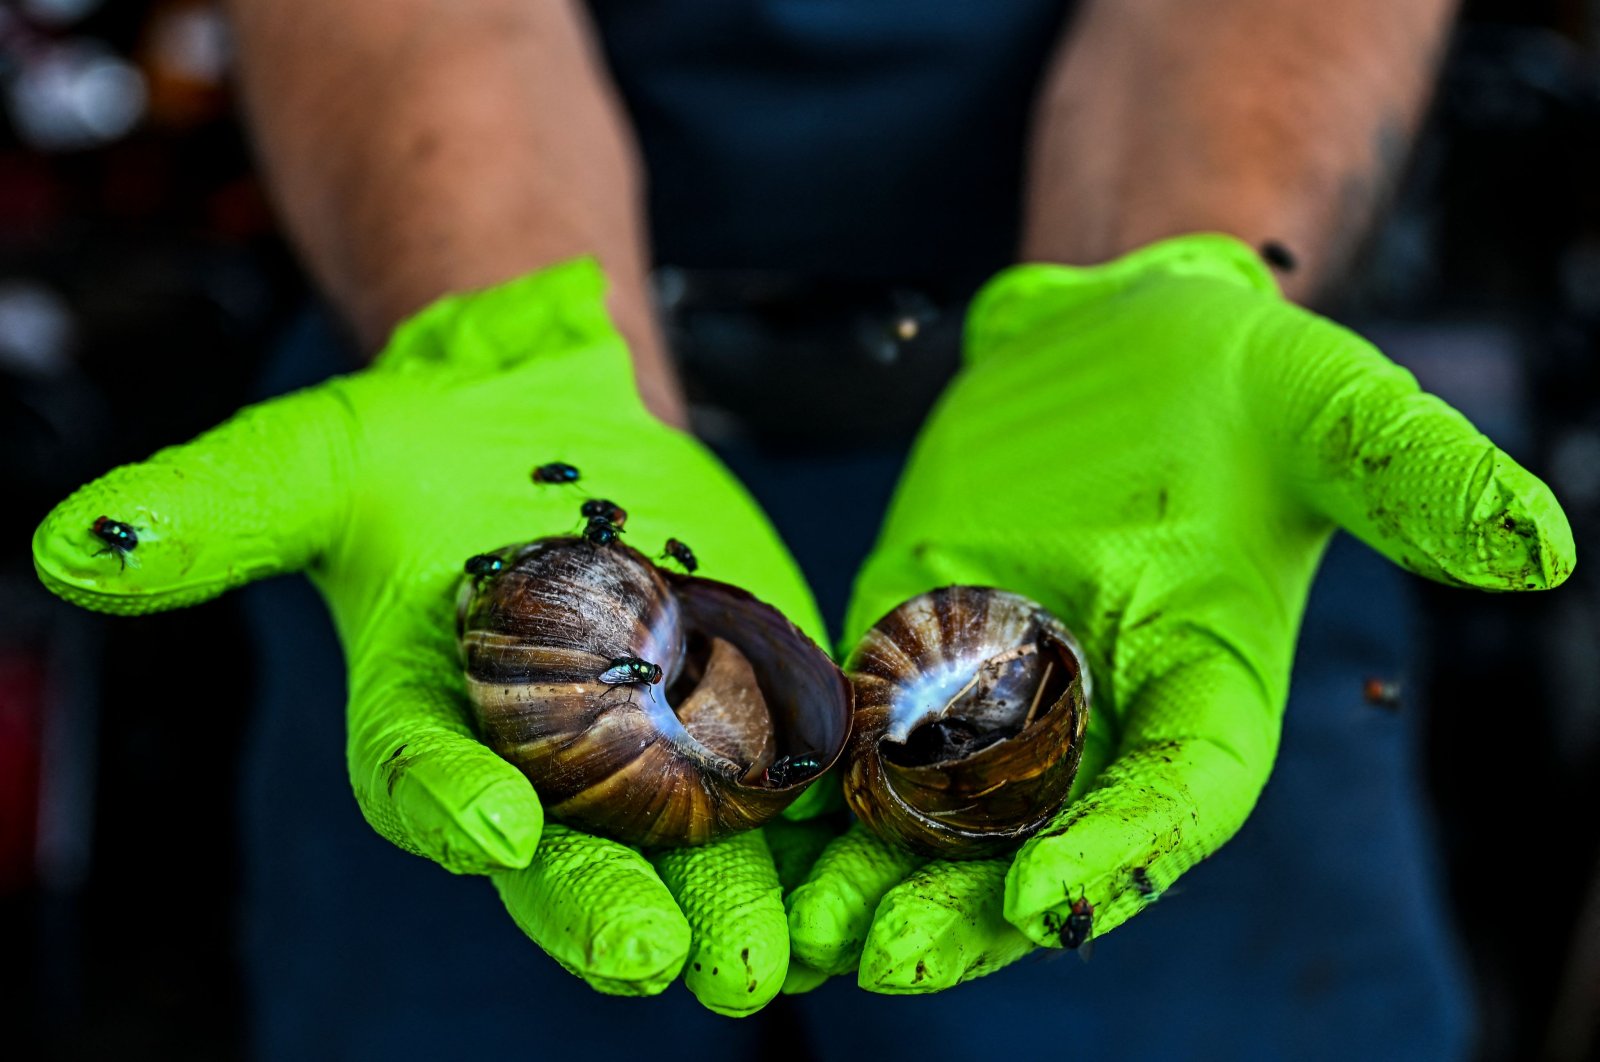 A local resident of Pasco County, Jay Pasqua, holds dead giant African snails he found in his backyard in New Port Richey, Florida, U.S., July 21, 2022. (AFP Photo)